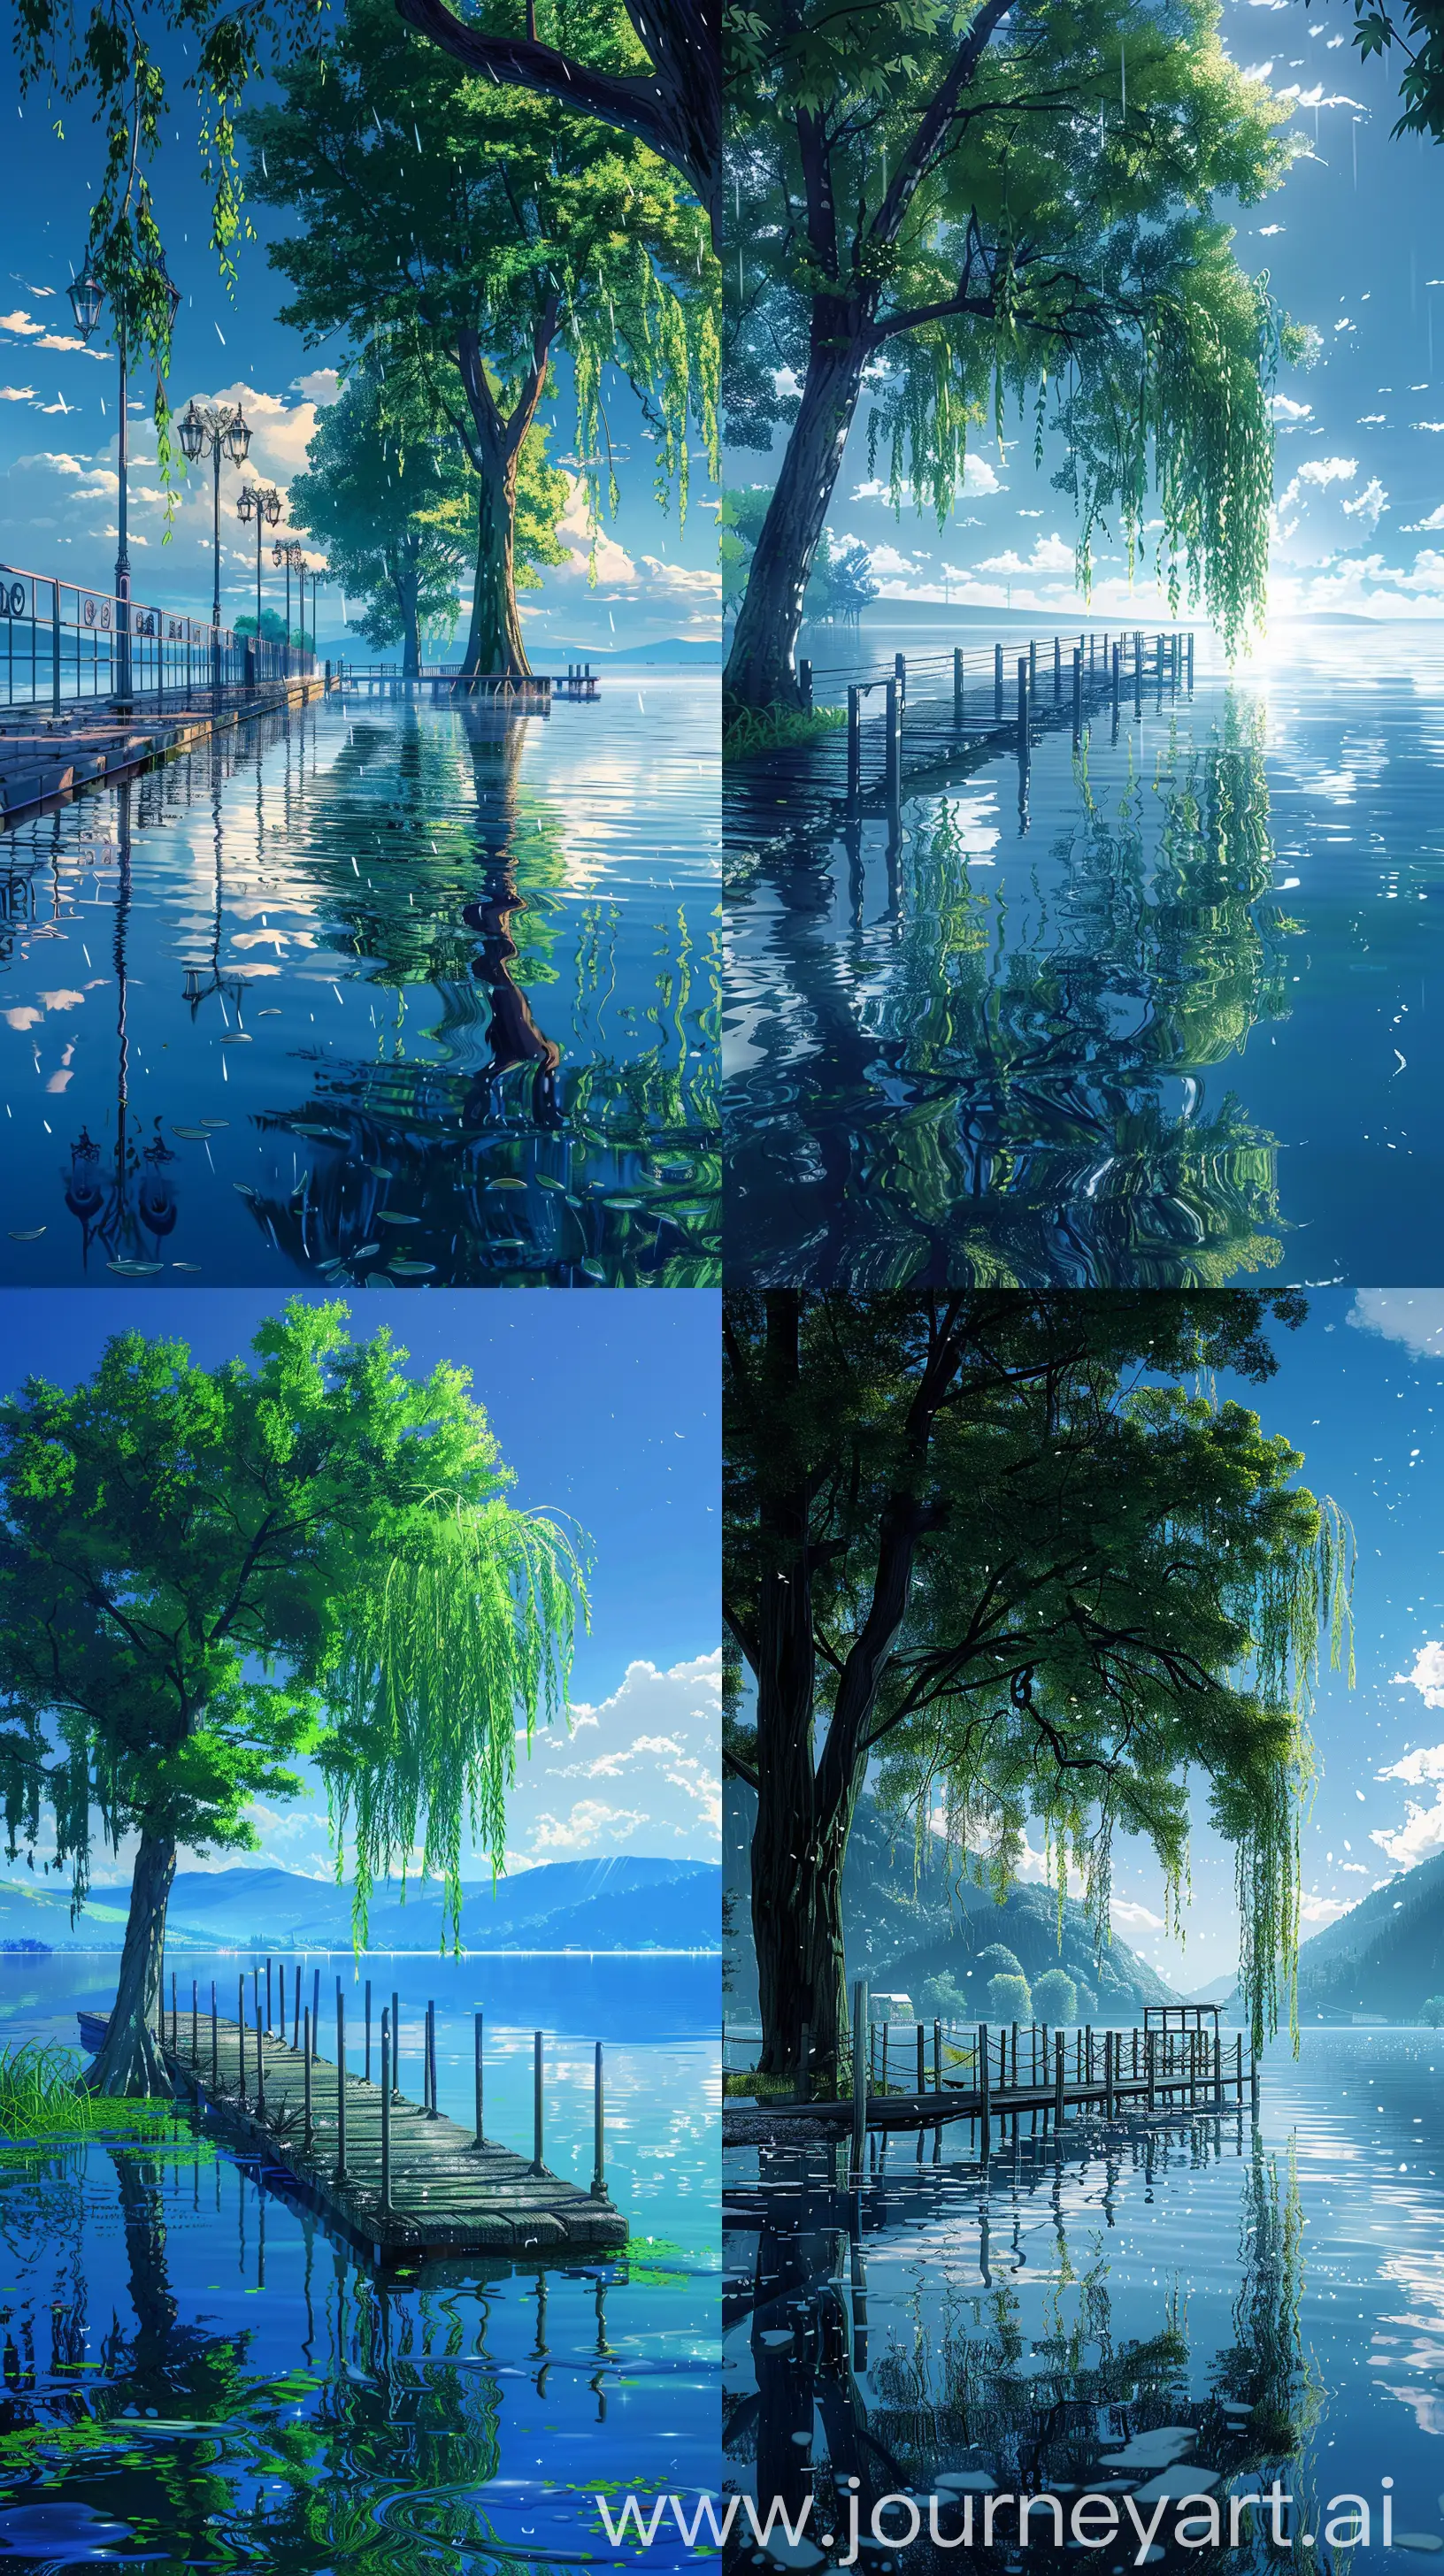 Beautiful anime scenary, mokoto shinkai style, High quality glassy reflection of day time hévíz lake, tranquil crystal clear water, wet pier, willow tree beside pier, morning time light blue sky, mesmerizing scane, verious scenary, mokoto shinkai style, ultra HD, high quality, 4k hd picture, sharp and smooth details, no hyperrealistic --ar 9:16 --s 400